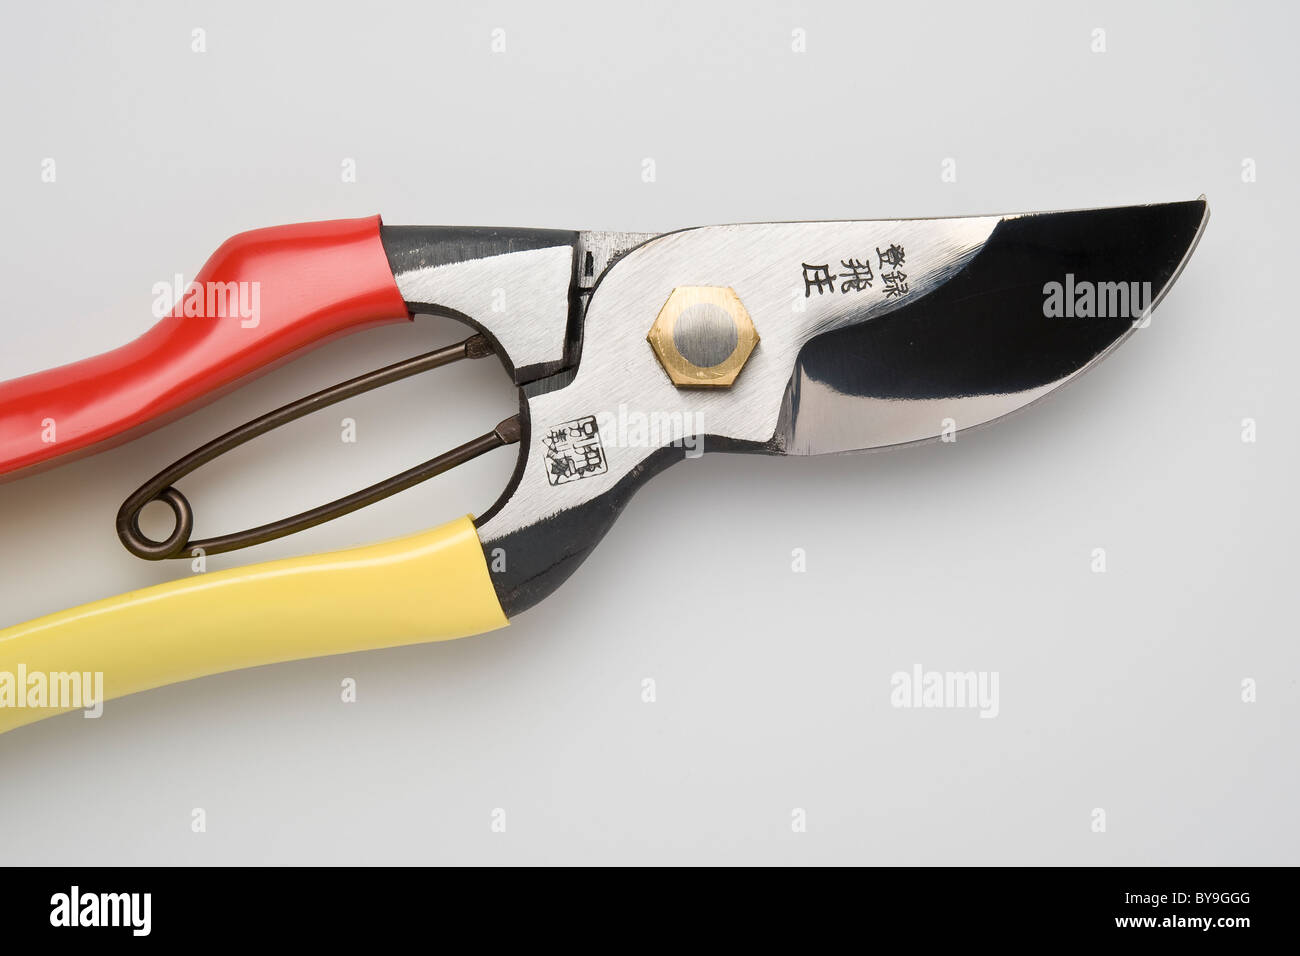 A pair of Tobisho secateurs. These are the finest gardening secateurs made in Japan, sold abroad by the Japanese gardening company Niwaki Stock Photo